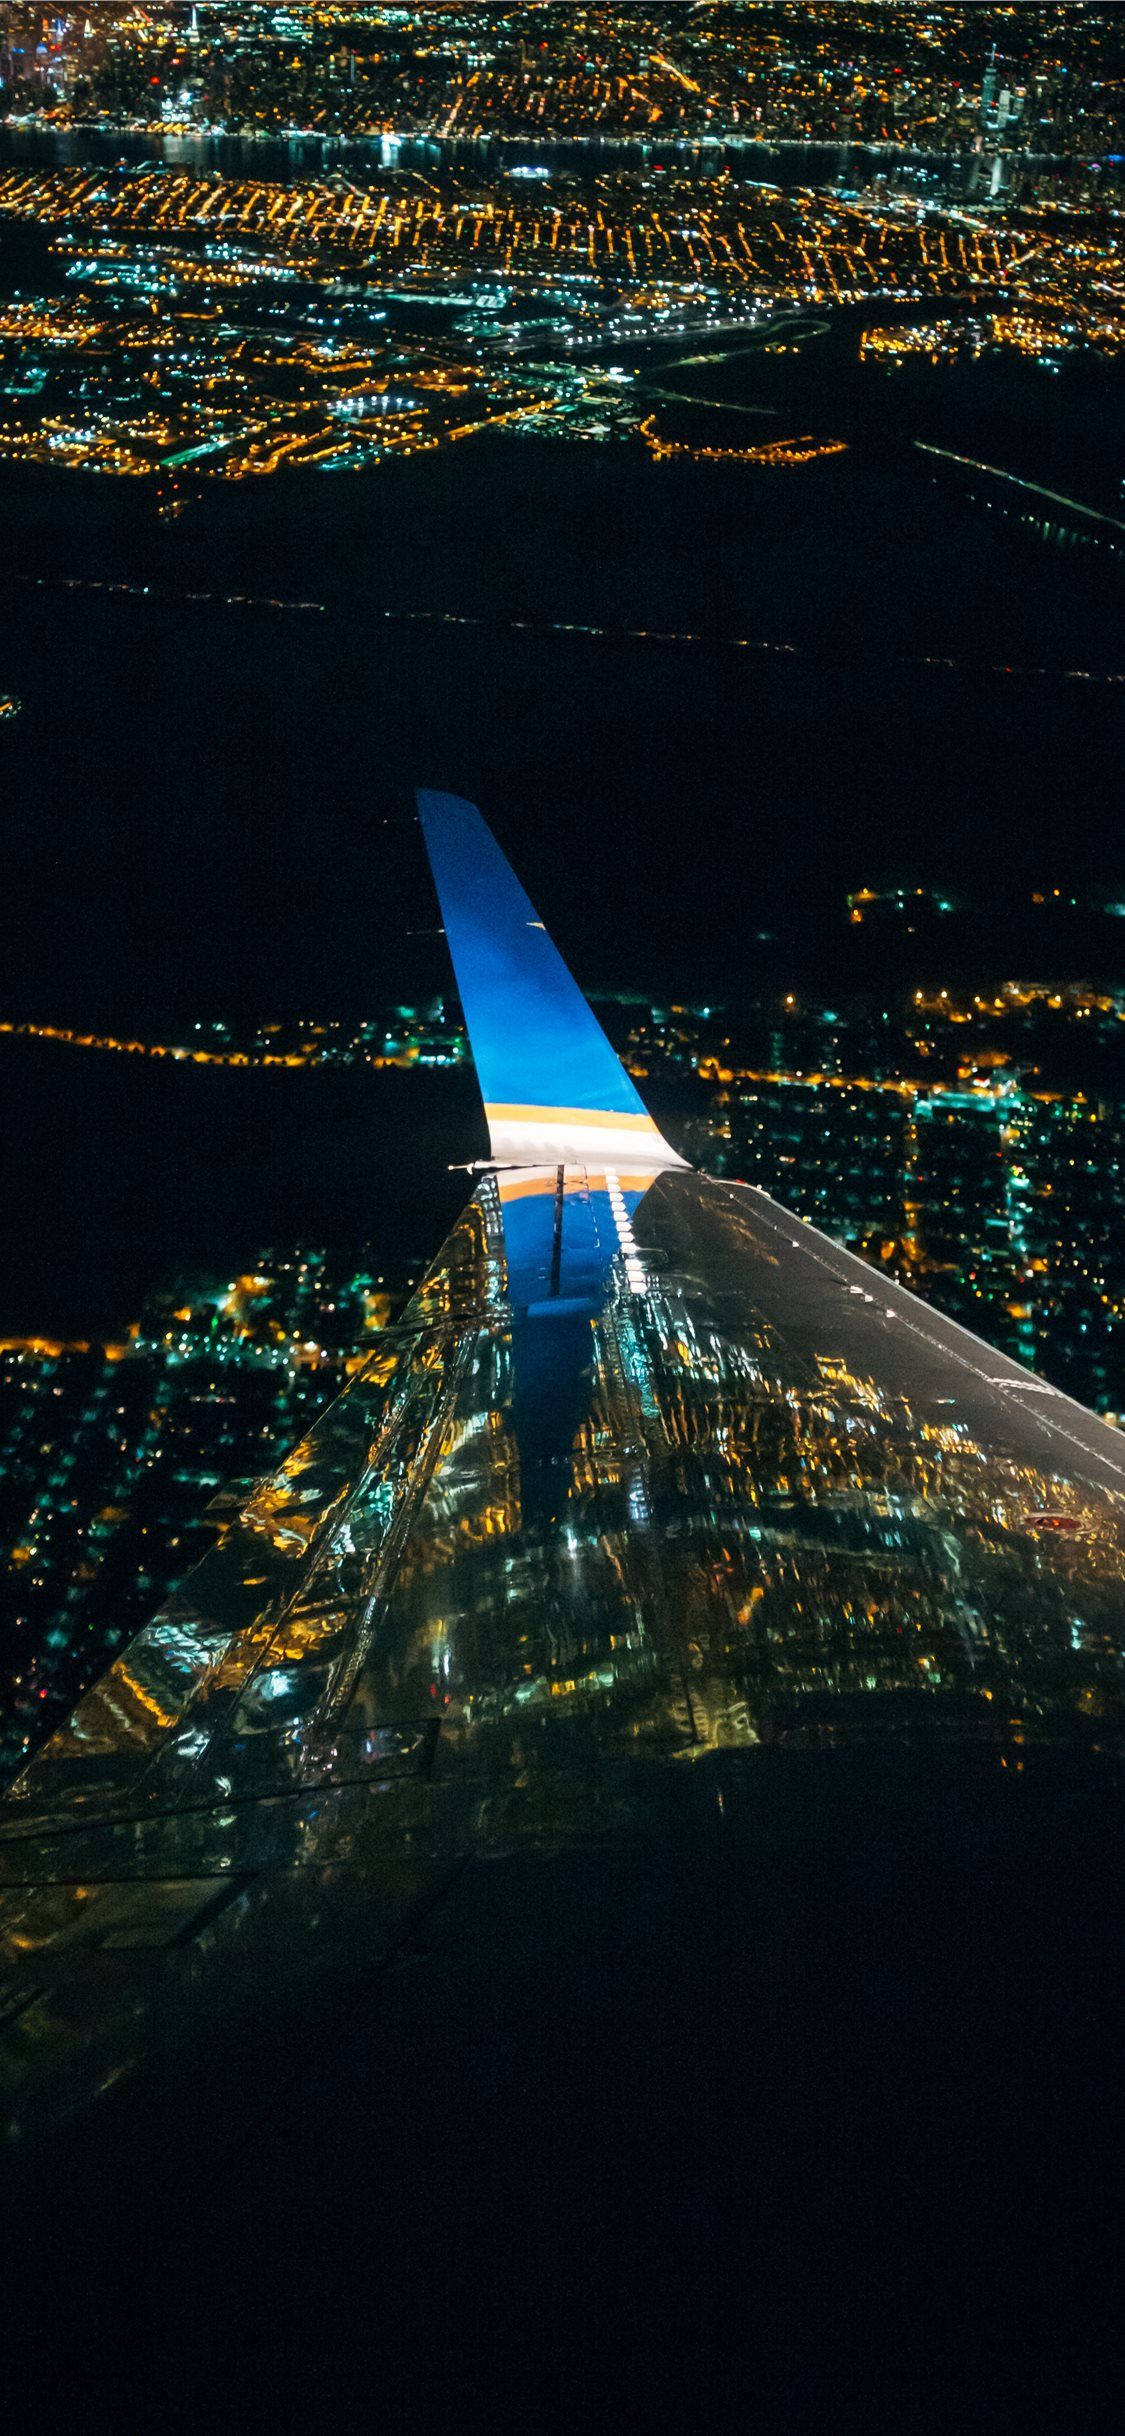 Night View Of Flying Airplane Android Wallpaper